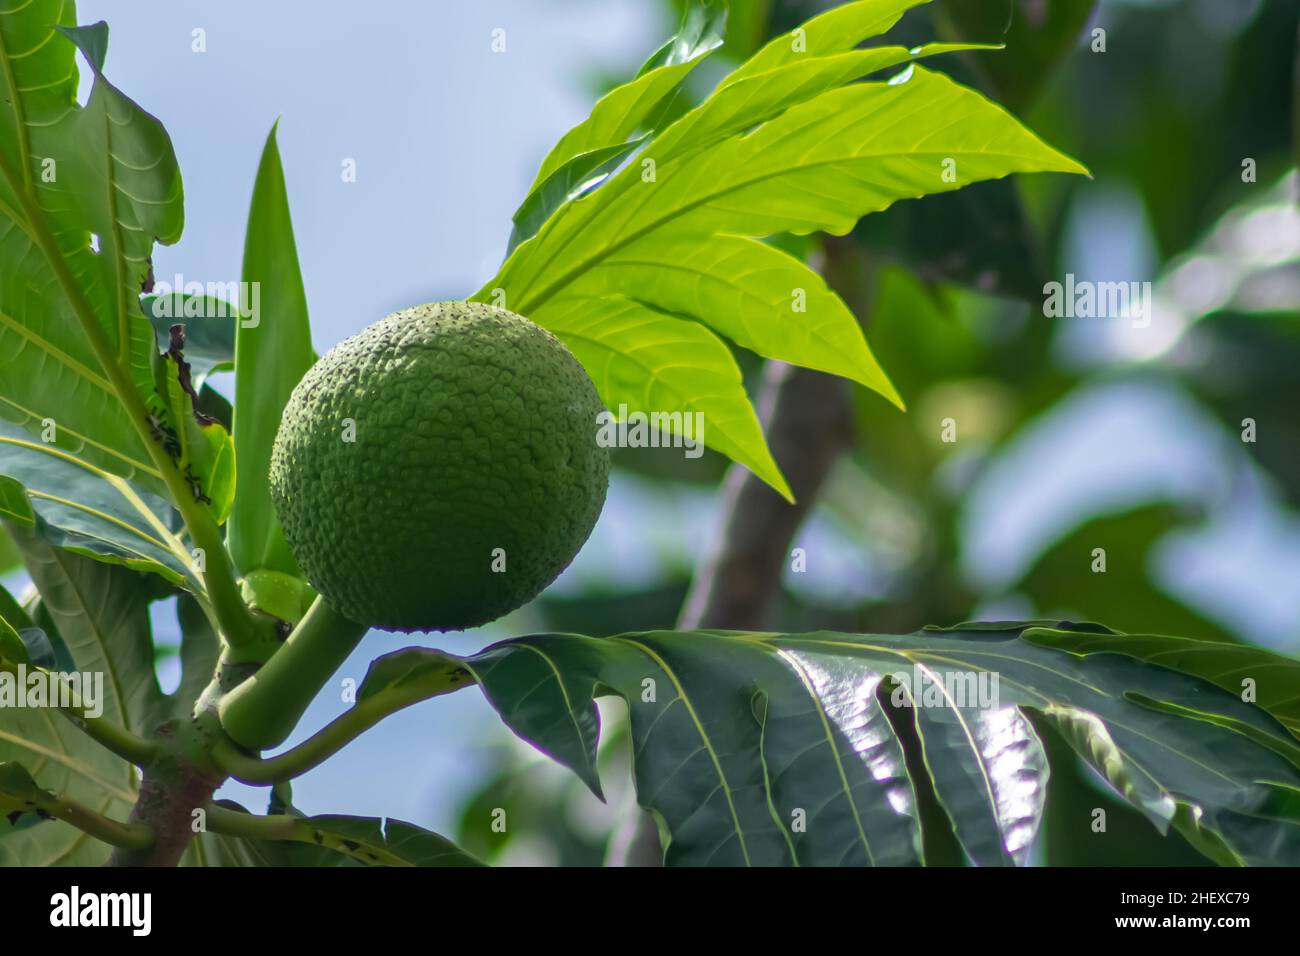 Fresh and green unripe tropical breadfruit with leaves hanging on the tree under the bright sunlight Stock Photo